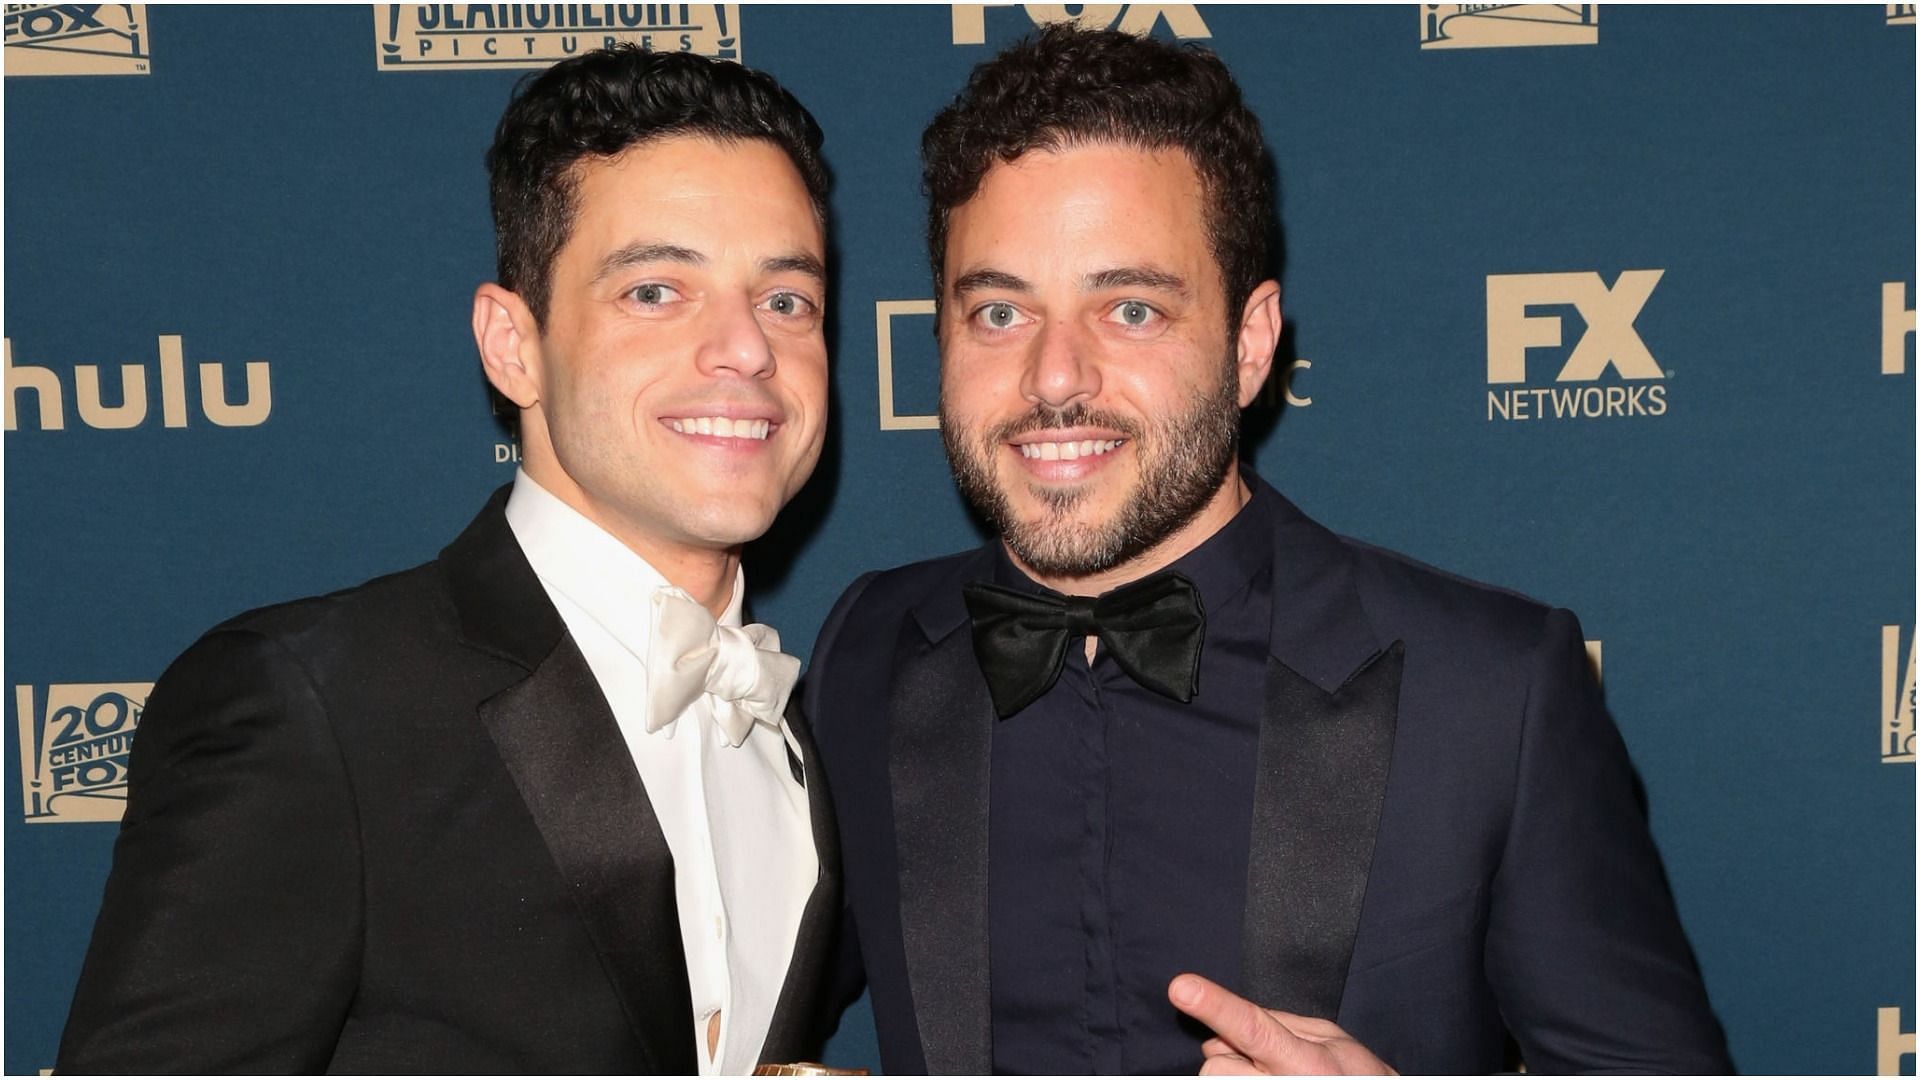 Rami Malek and Sami Malek attend the FOX, FX and Hulu 2019 Golden Globe Awards after party at The Beverly Hilton Hotel in Beverly Hills, California. (Image via Getty Images)